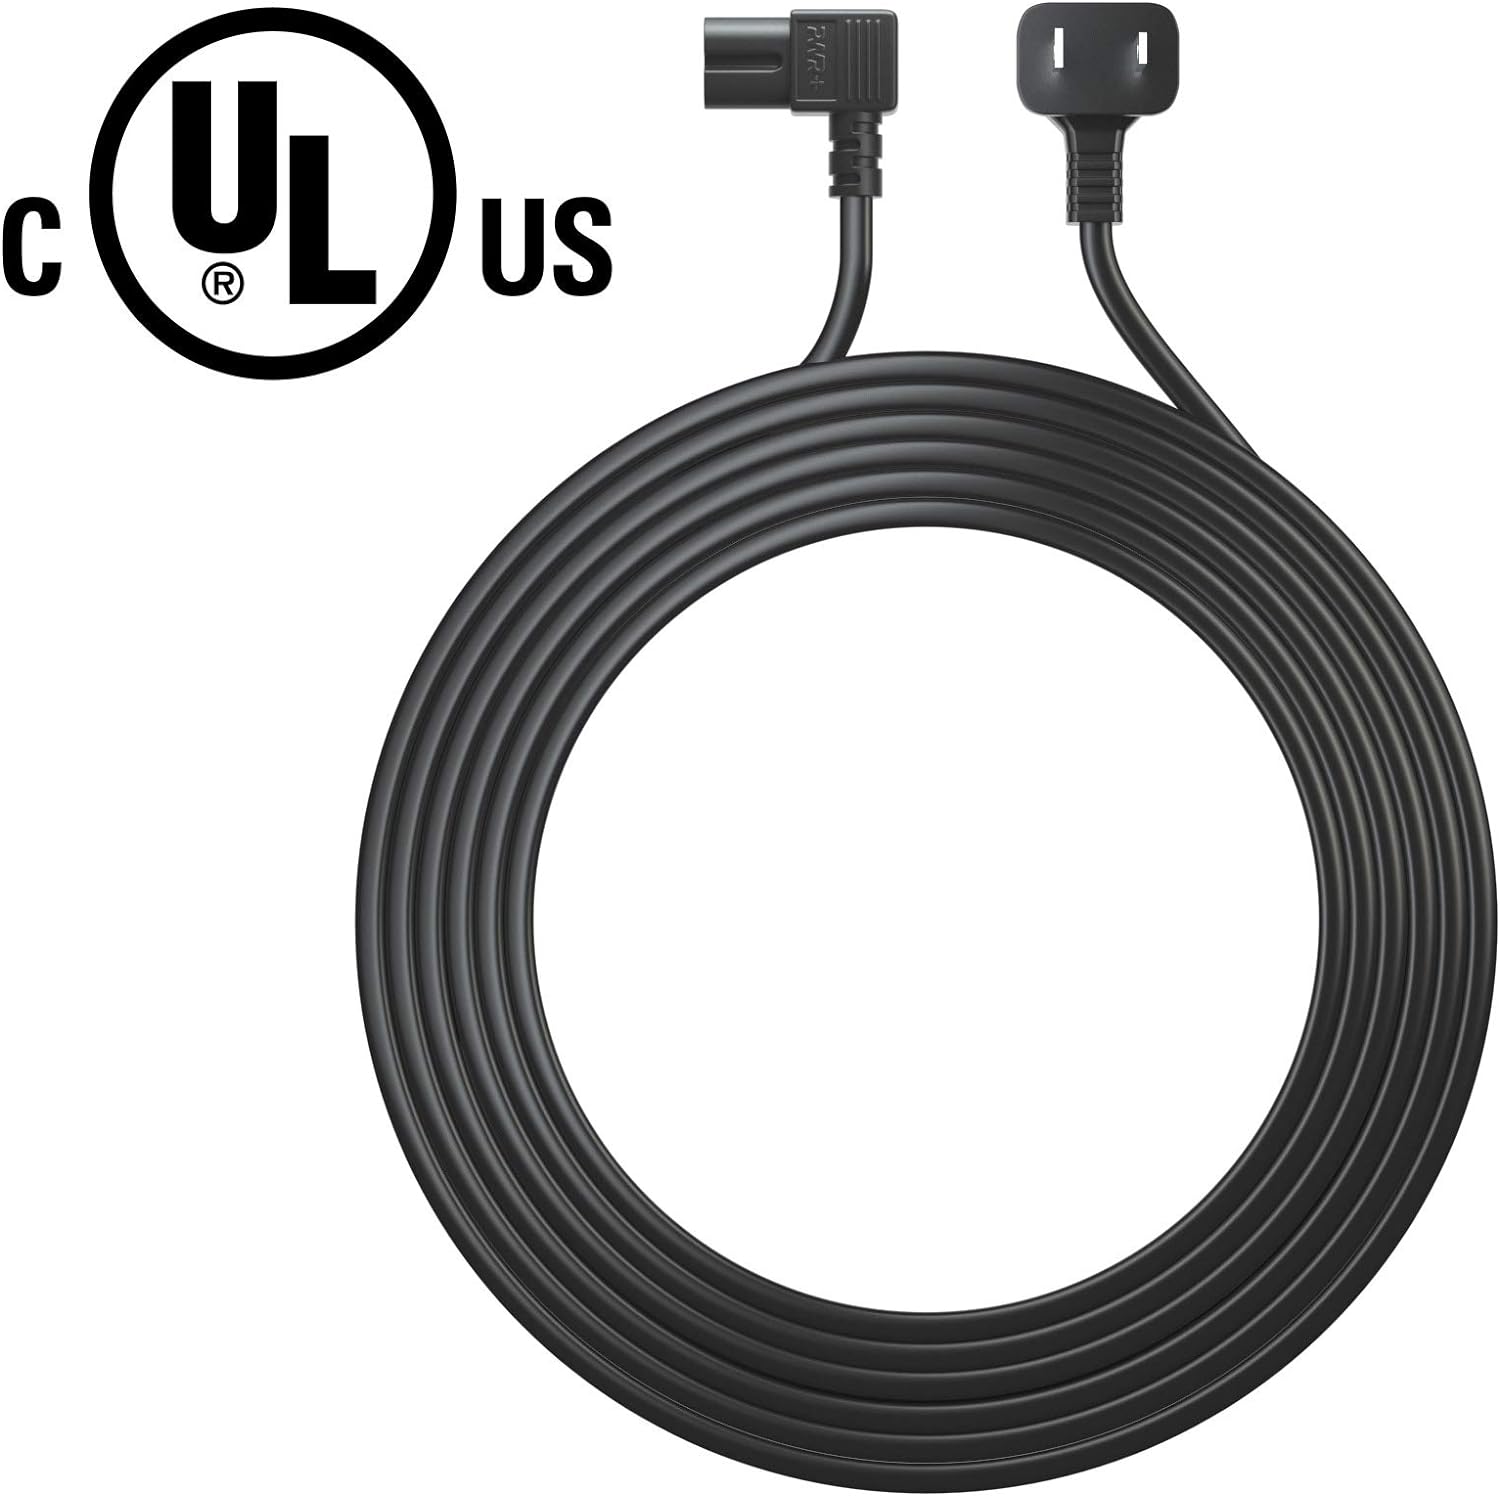 PWR+ Extra Long 12FT AC Power Cord (2 Prong/2 Slot)